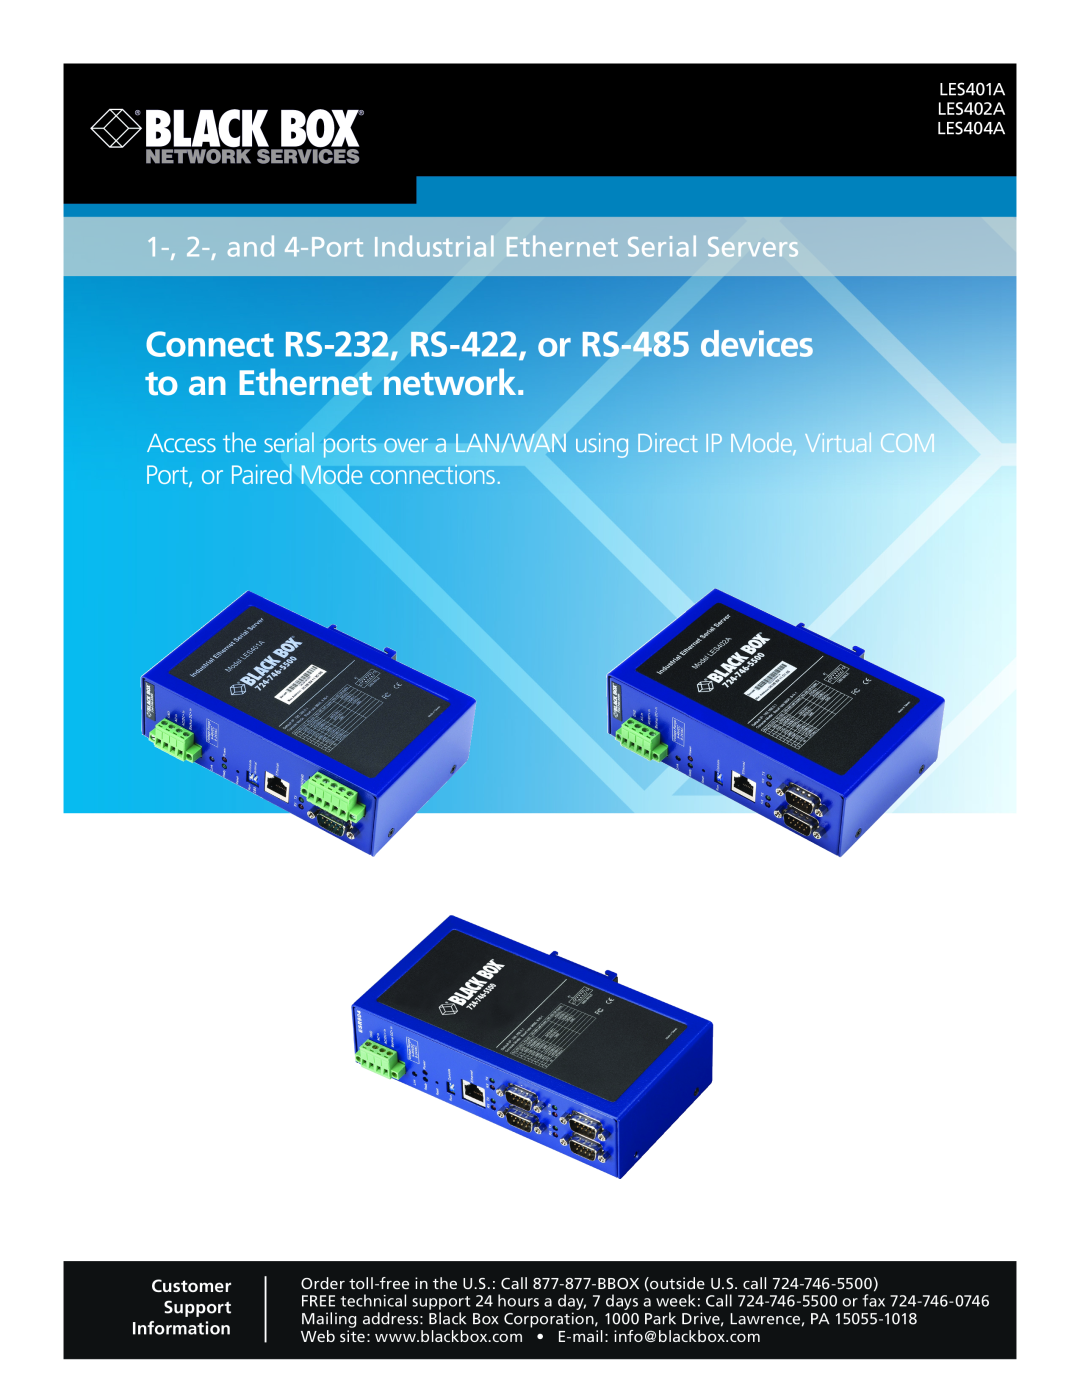 Black Box manual Connect RS-232, RS-422, or RS-485 devices to an Ethernet network, LES401A LES402A LES404A 